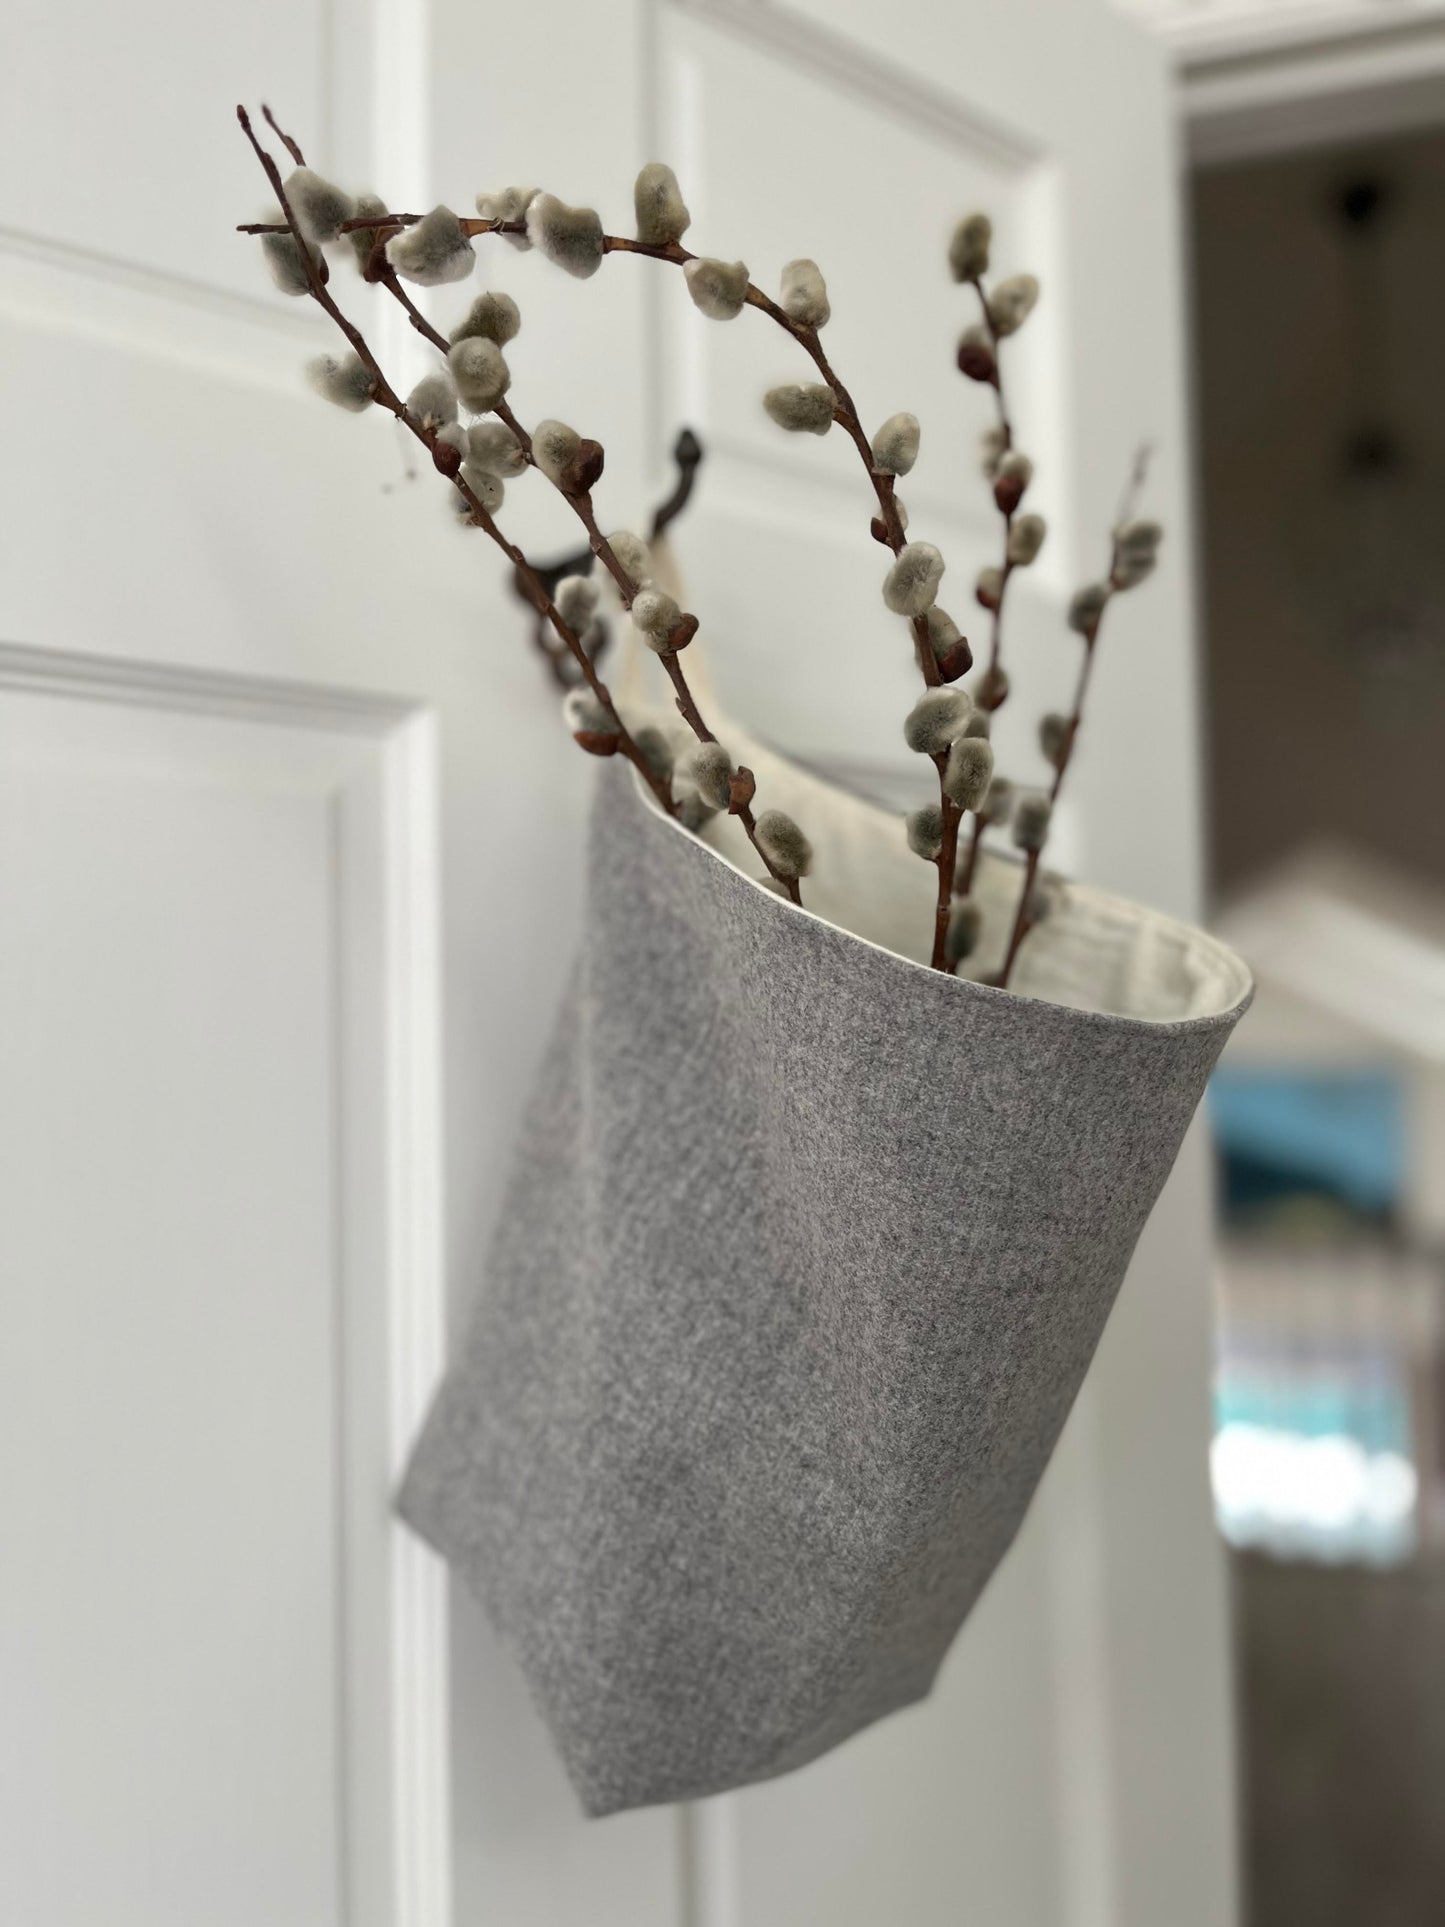 A wool sack lined with ivory flannel hangs from a hook on a white bedroom door. It is filled with soft grey pussy willows.